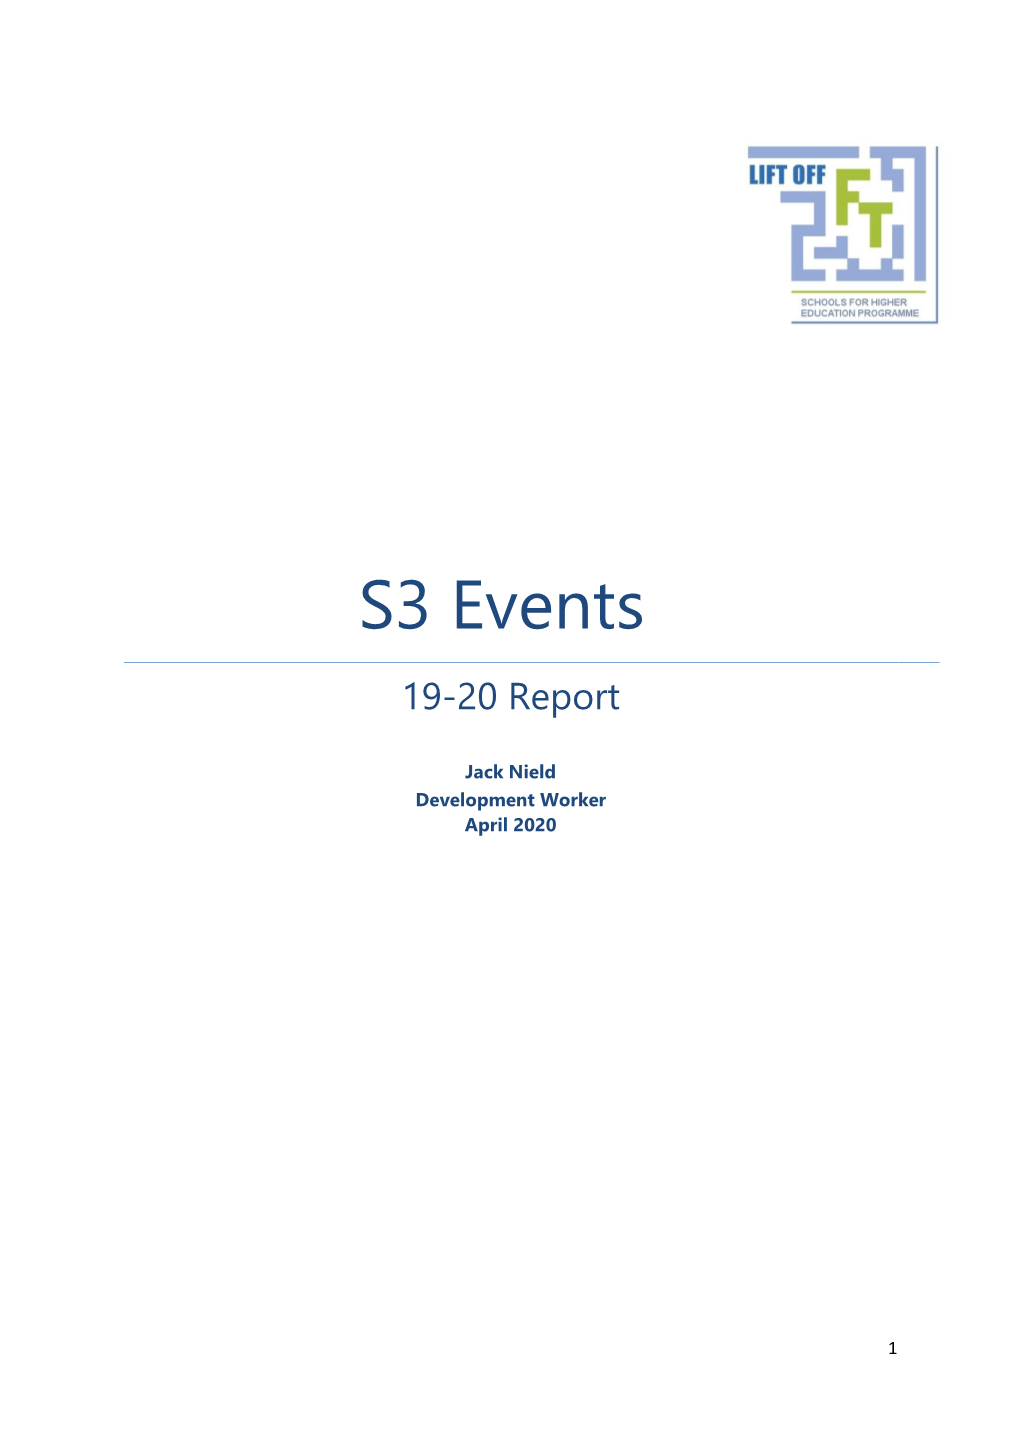 S3 Events 19-20 Report